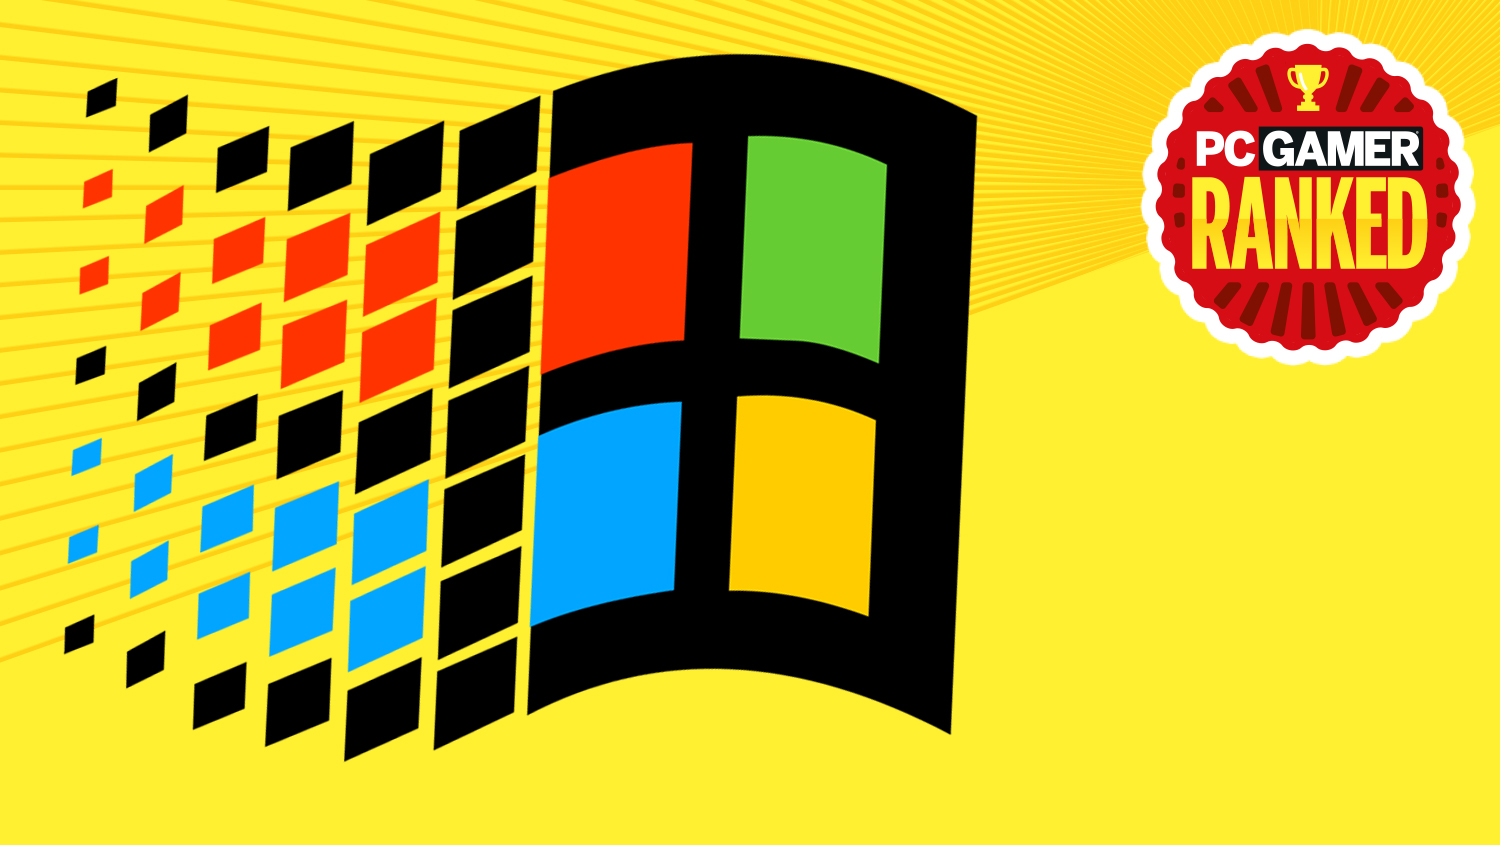 Every version of Windows, ranked from worst to best | PC Gamer